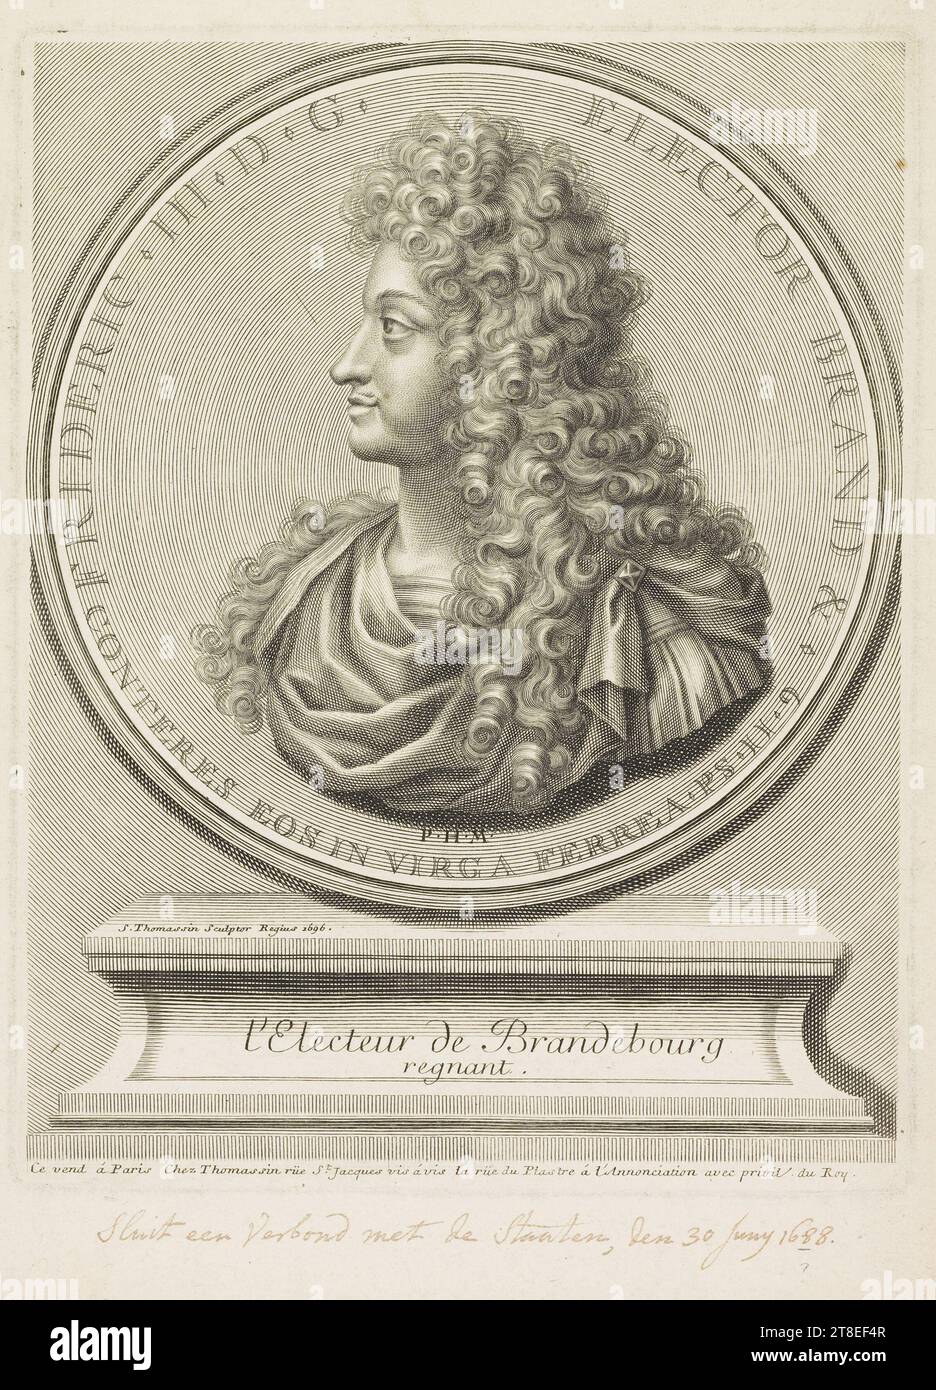 FRIDERIC III D.G. ELECTOR BRAND & CONTERES EOS IN VIRGA FERREA PS II. P.H.M. S. Thomassin sculptor Regius 1696. the reigning Elector of Brandenburg. It is sold in Paris at Thomassin's, rue St. Jacques vis à vis la rue du Plastre à l'Annonciation with the privilege of the King Stock Photo